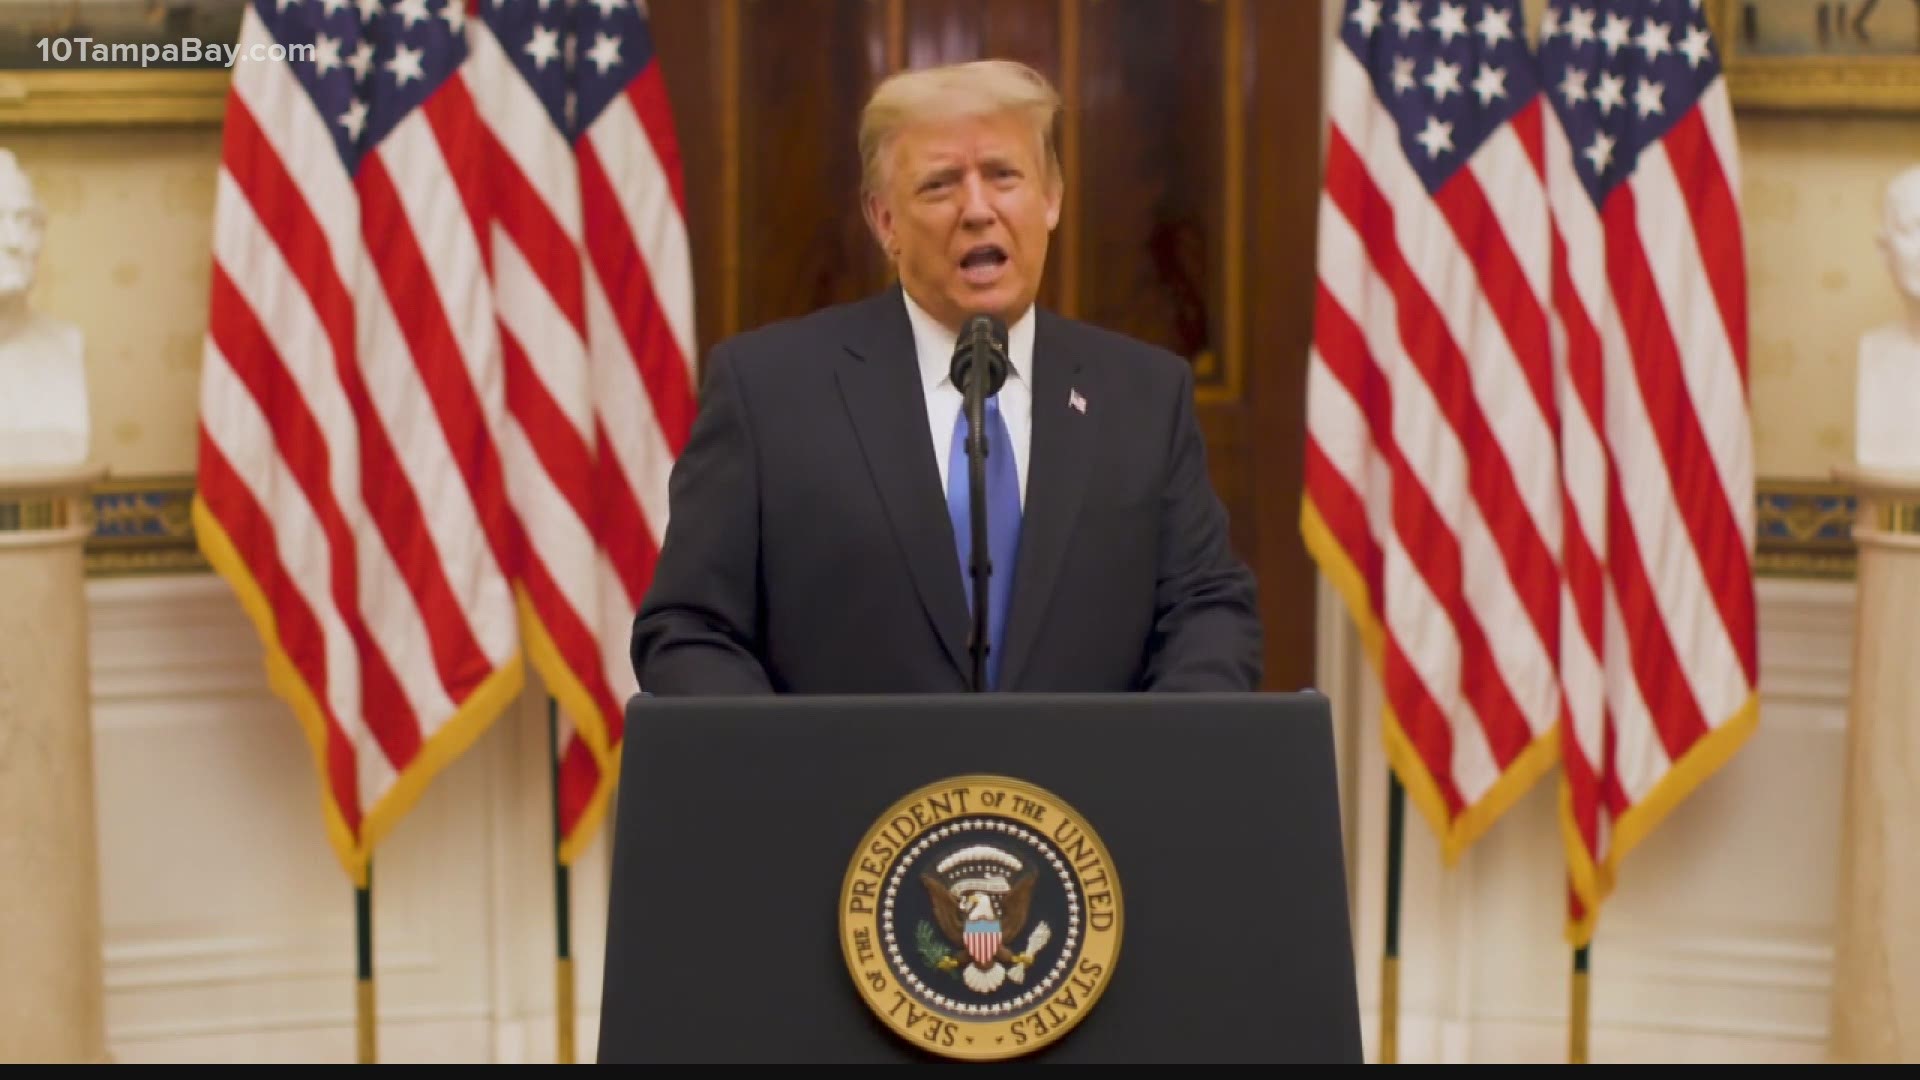 On his last full day in office, Trump leaves his final remarks in a video message from the White House.